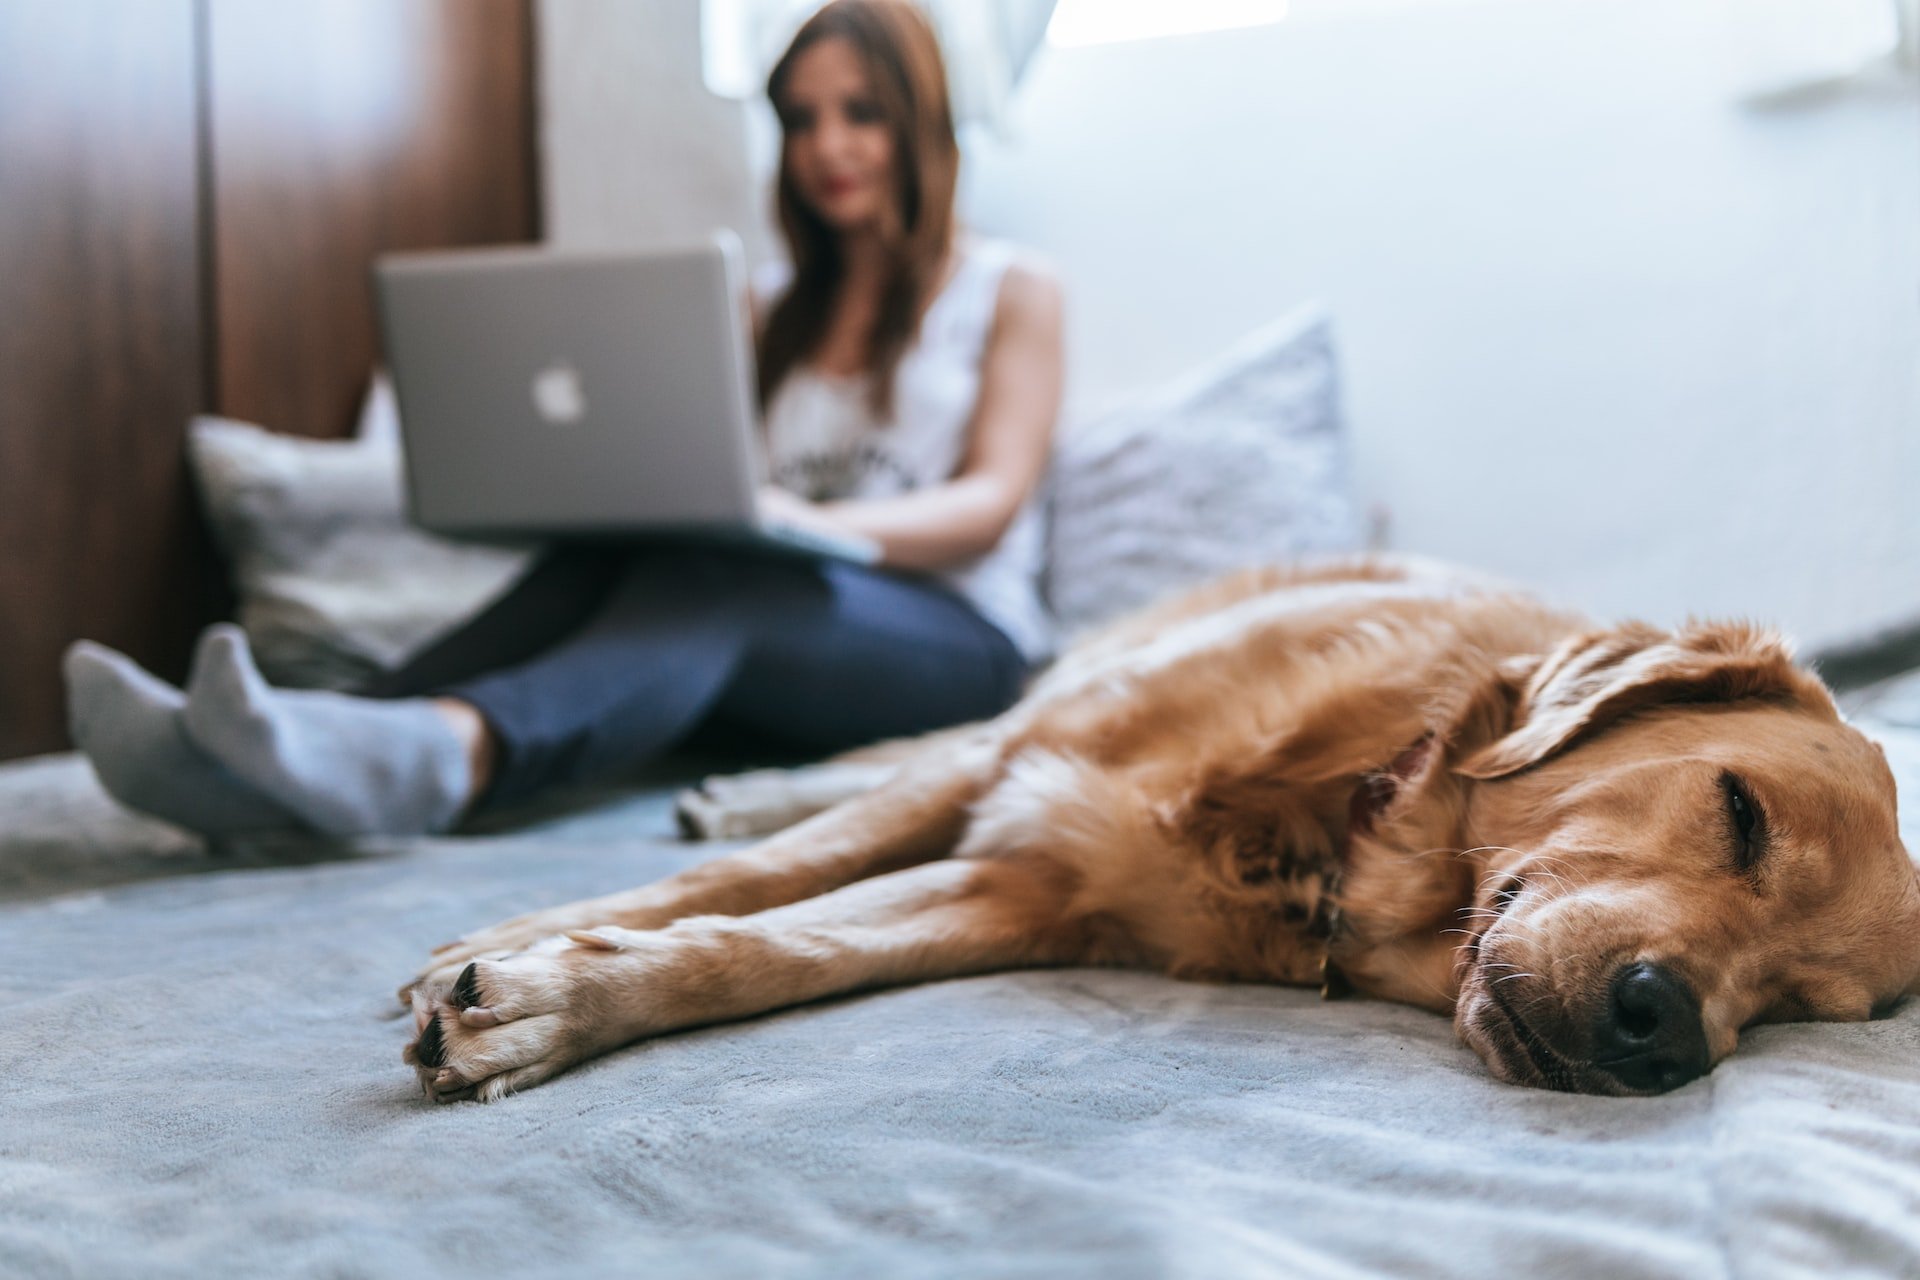 A woman sitting on a bed, using a laptop, with a dog sleeping beside her.